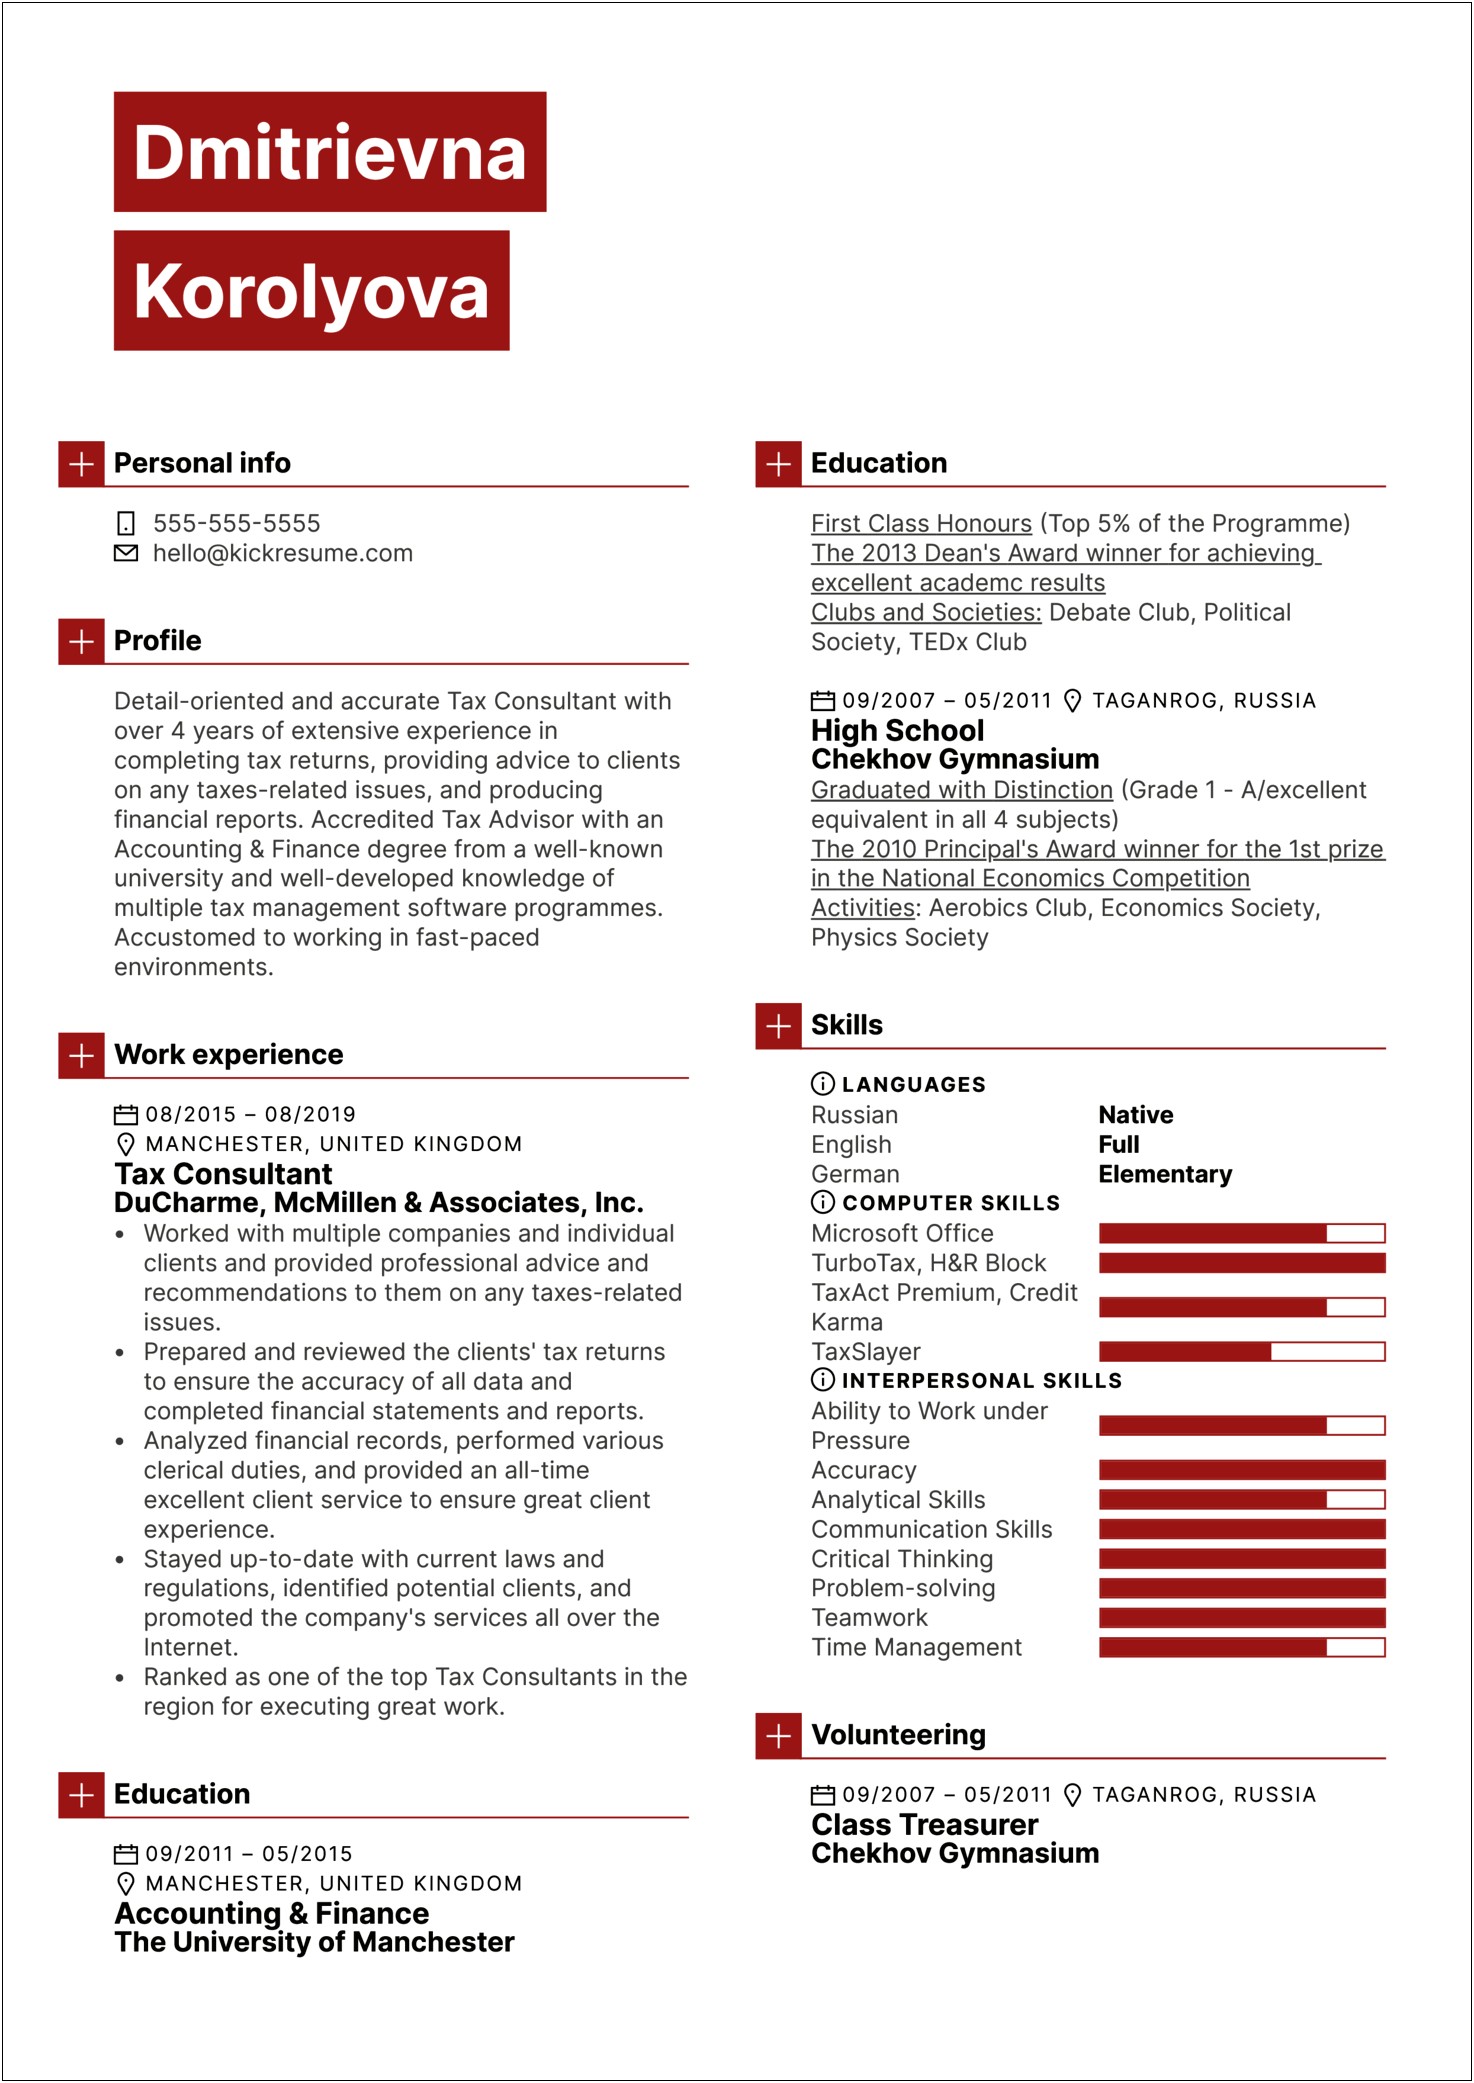 Resume Sample For International Tax Manager